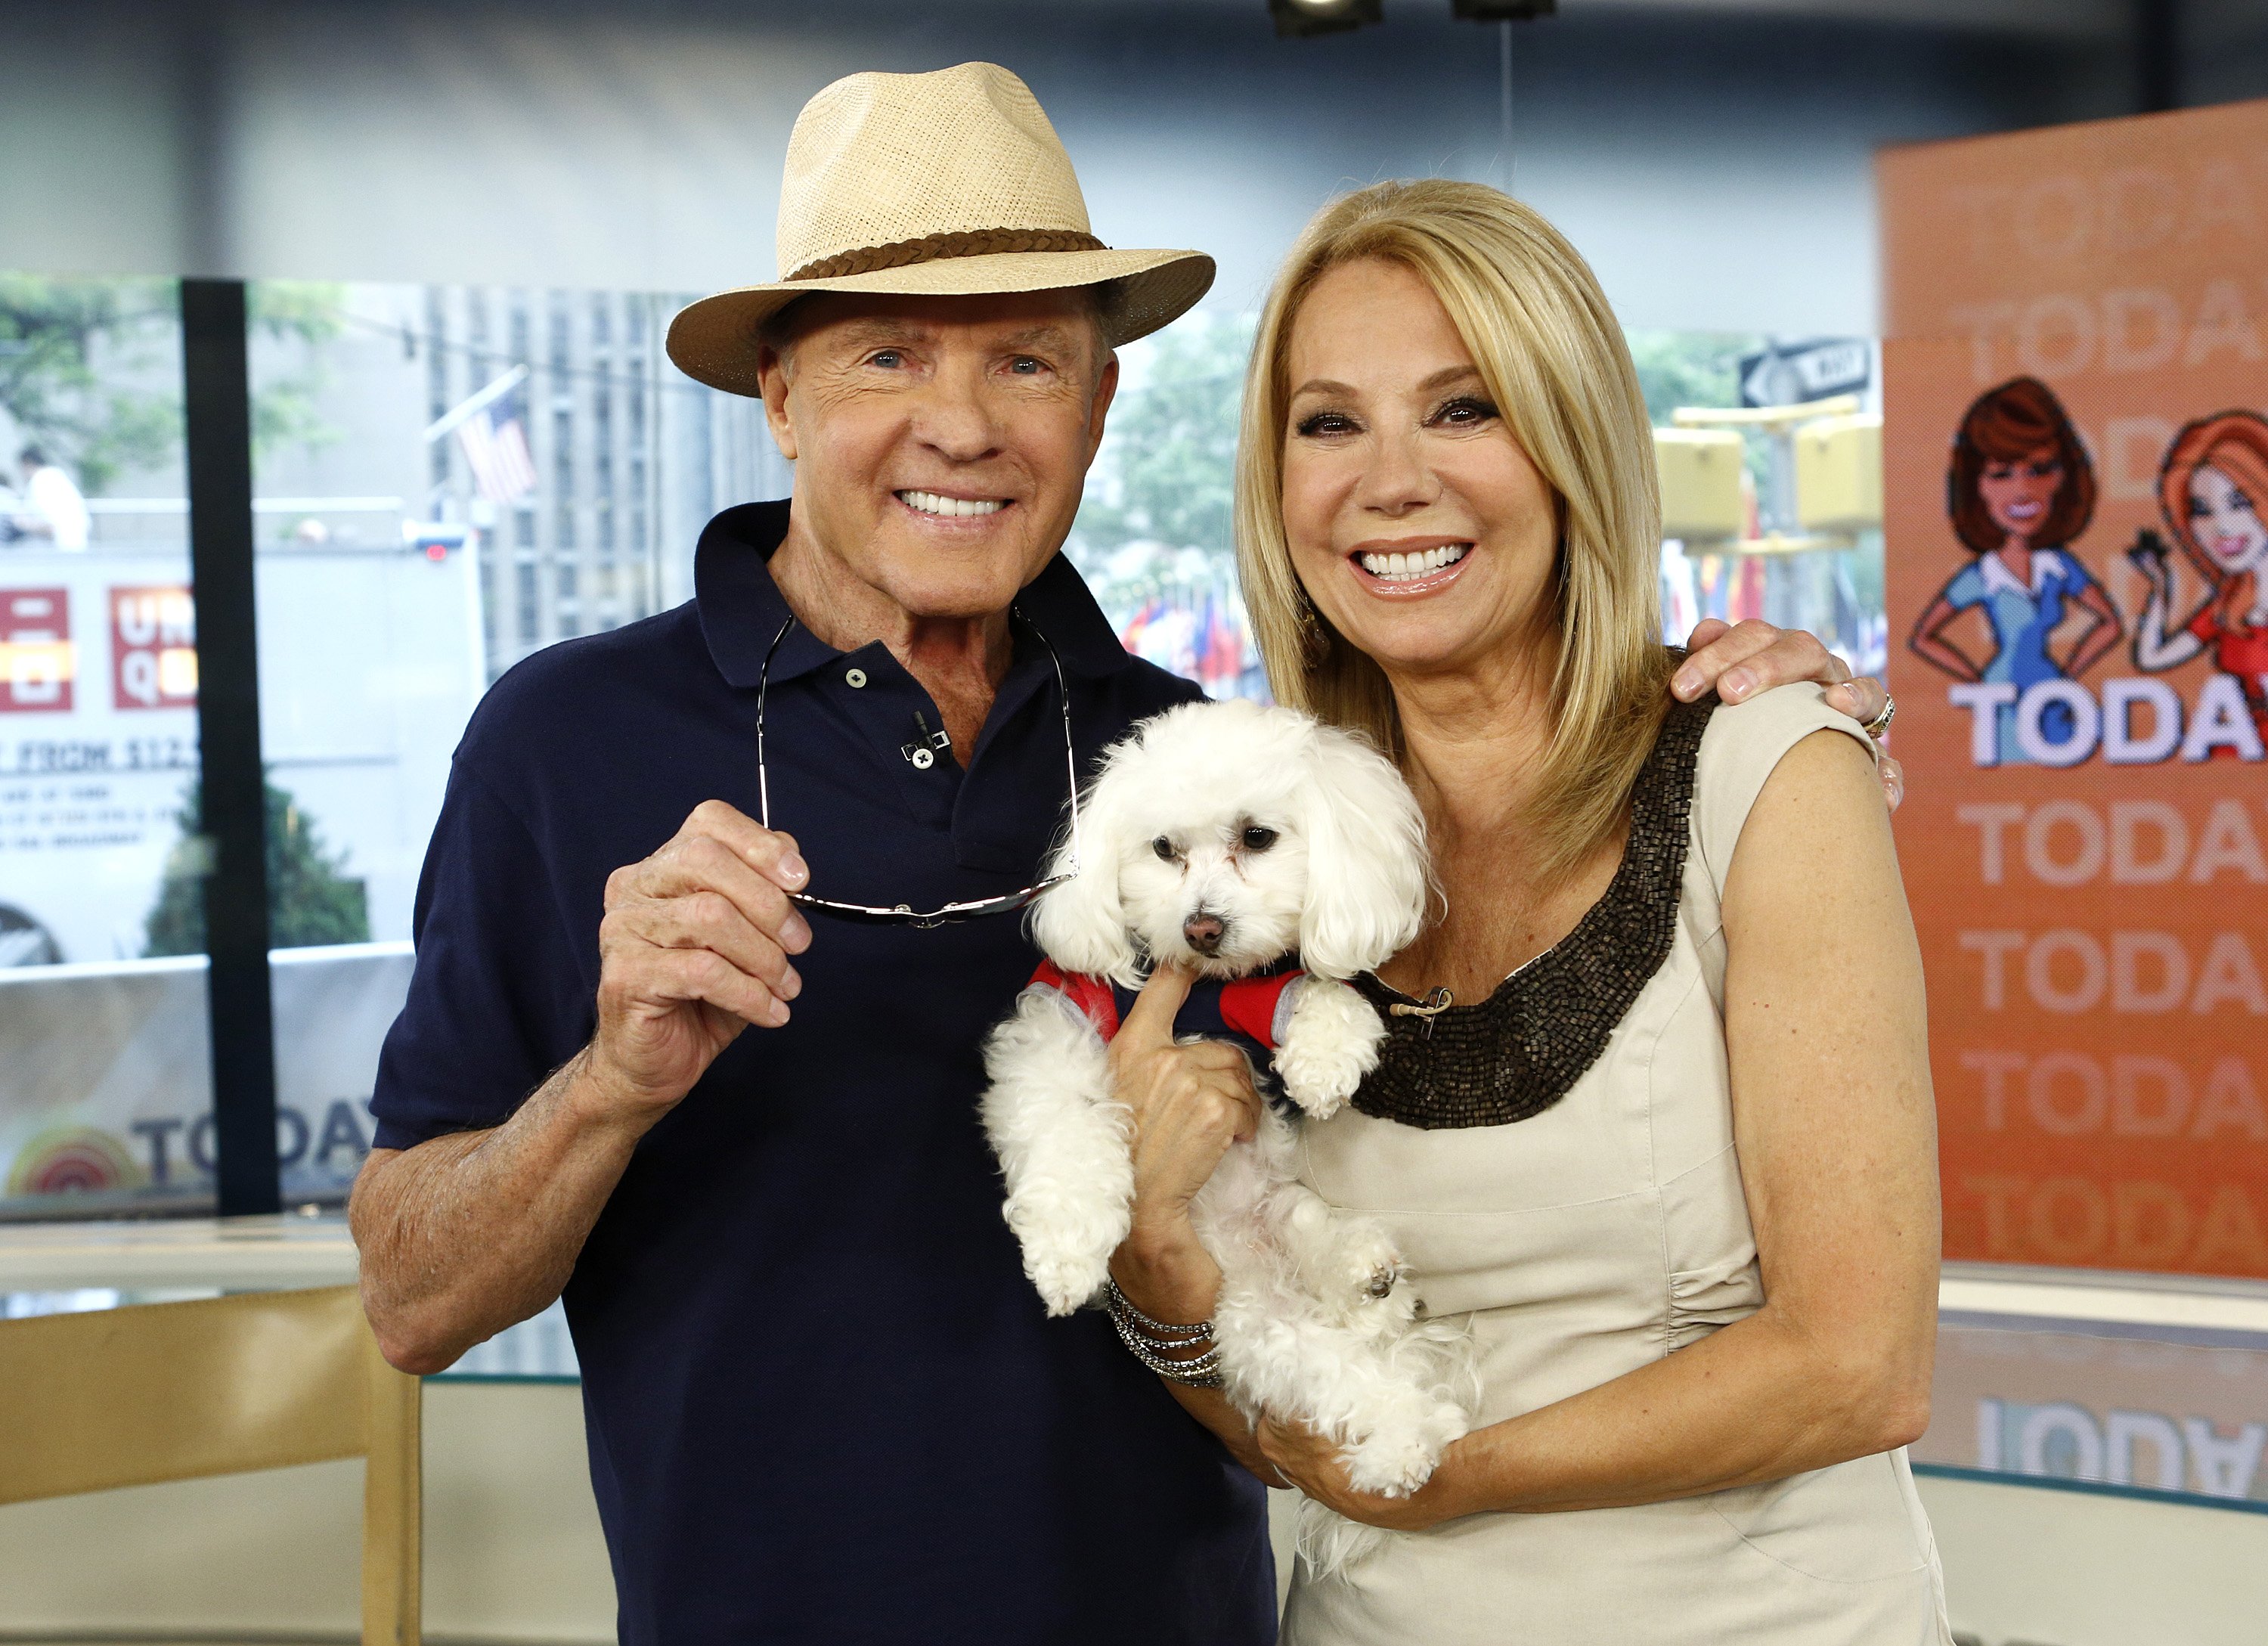 Frank Gifford and Kathie Lee Gifford appear on NBC News' "Today" show. | Source: Getty Images